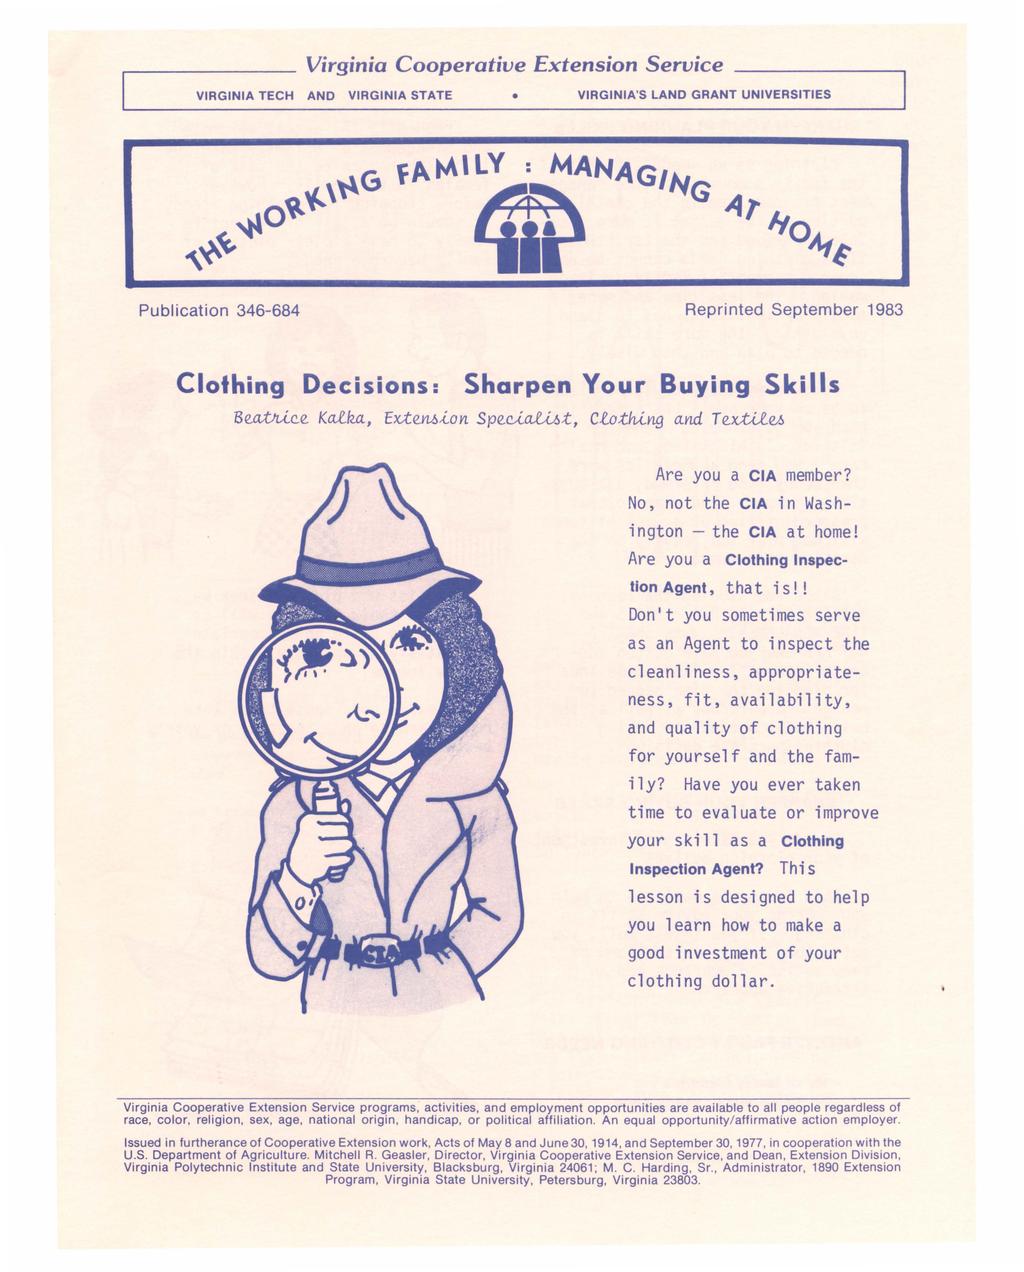 Virginia Cooperative Extension Service VIRGINIA TECH AND VIRGINIA STATE VIRGINIA'S LAND GRANT UNIVERSITIES Publication 346-684 Reprinted September 1983 Clothing Decisions: Sharpen Your Buying Skills